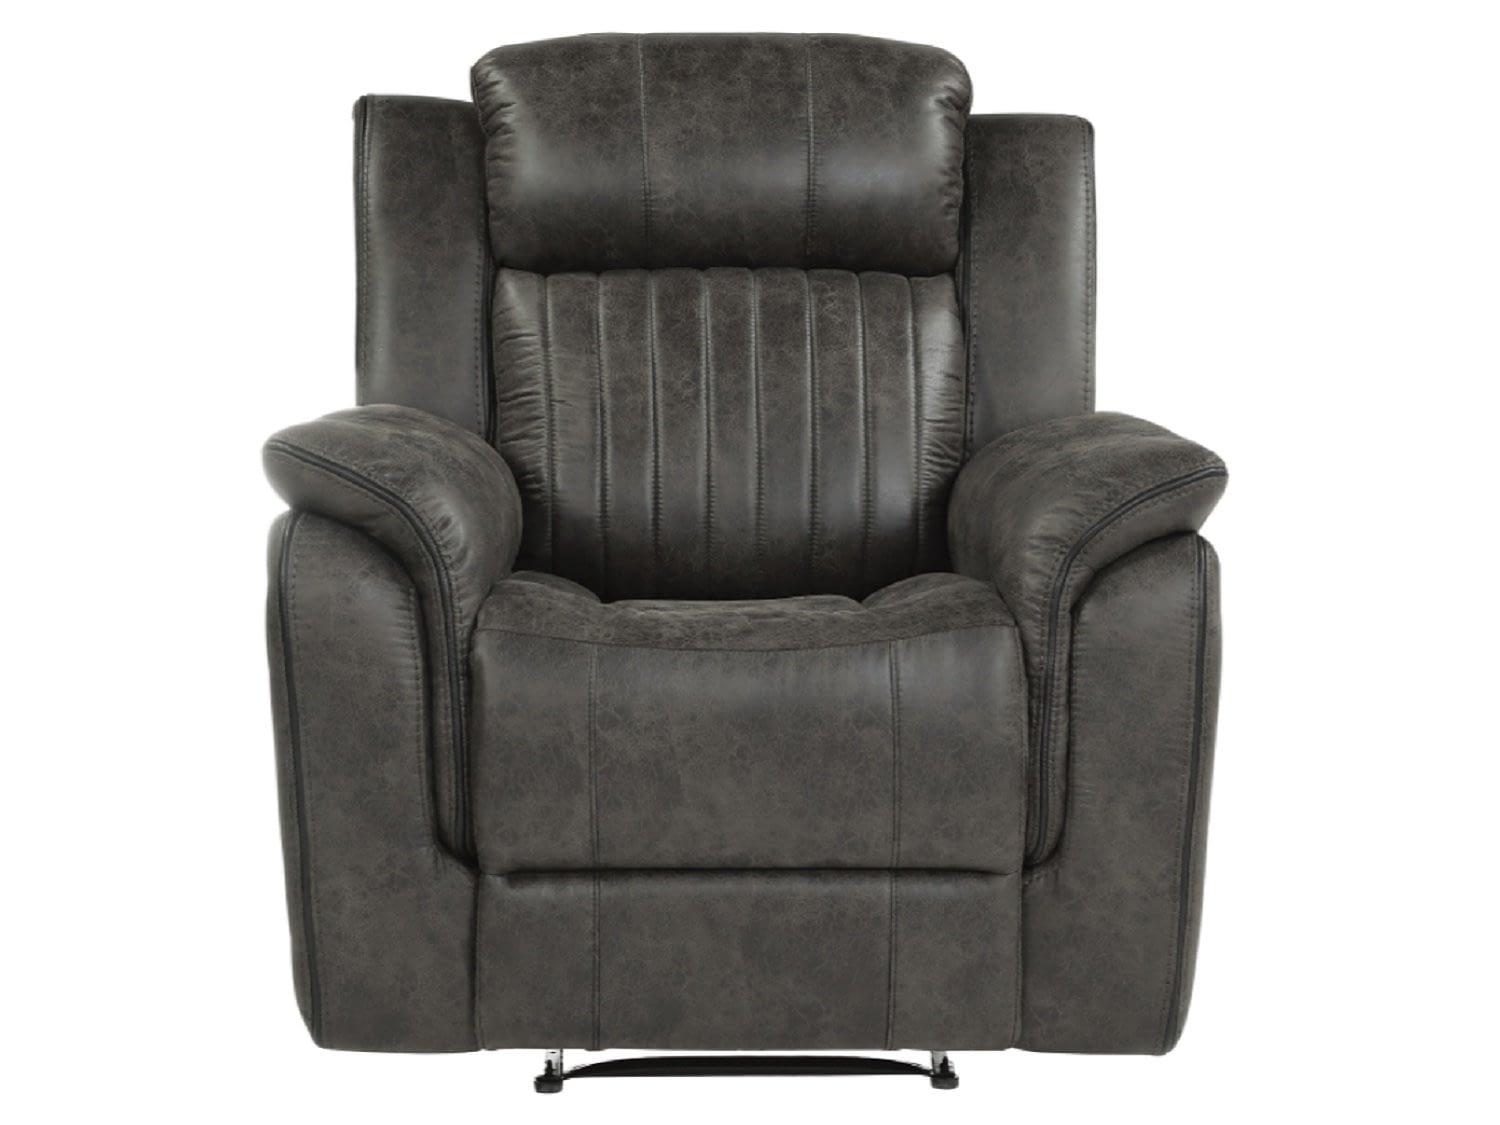 SONORA Recliner Chair - Zoom